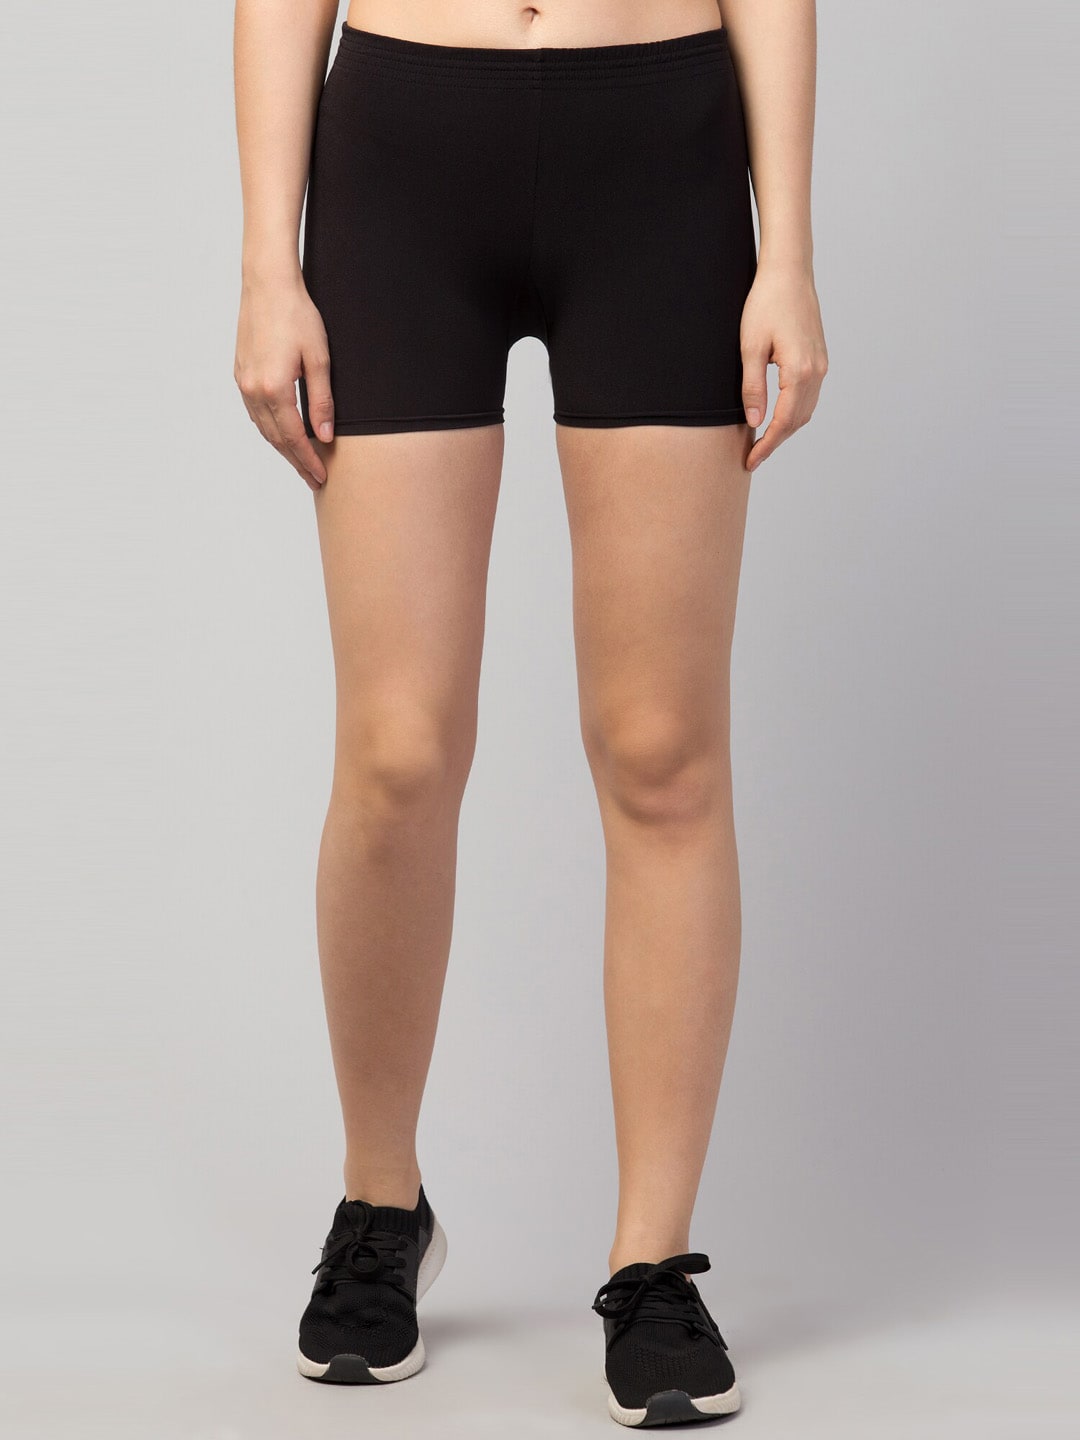 Apraa & Parma Women Black Skinny Fit Cycling e-Dry Technology Technology Shorts Price in India